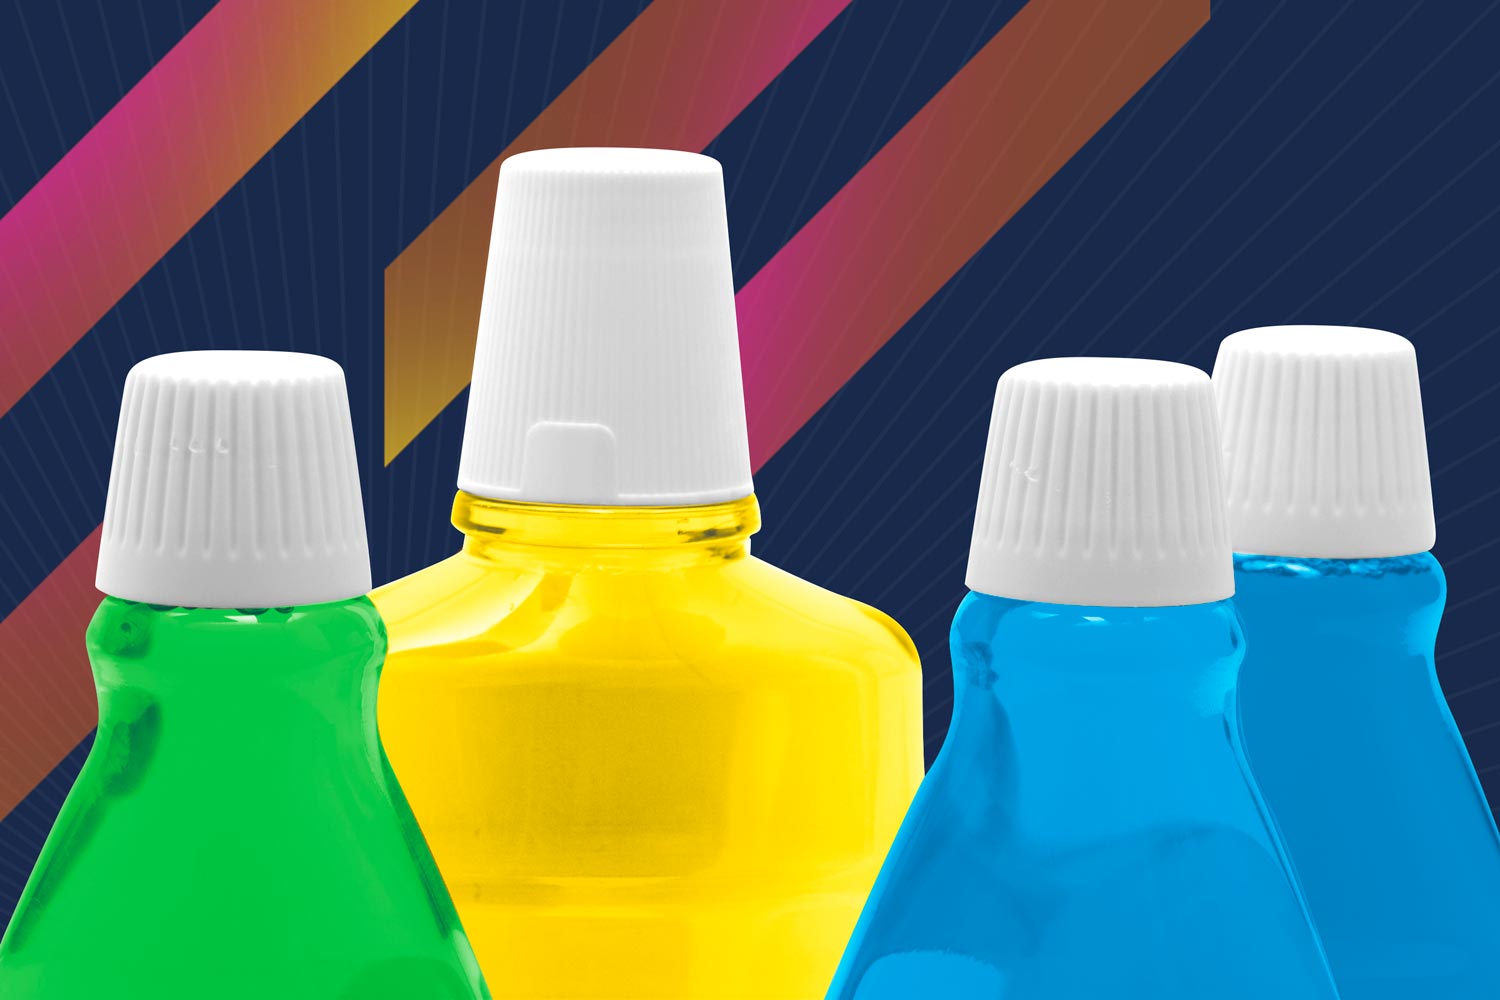 Green, yellow, and blue bottles with white caps